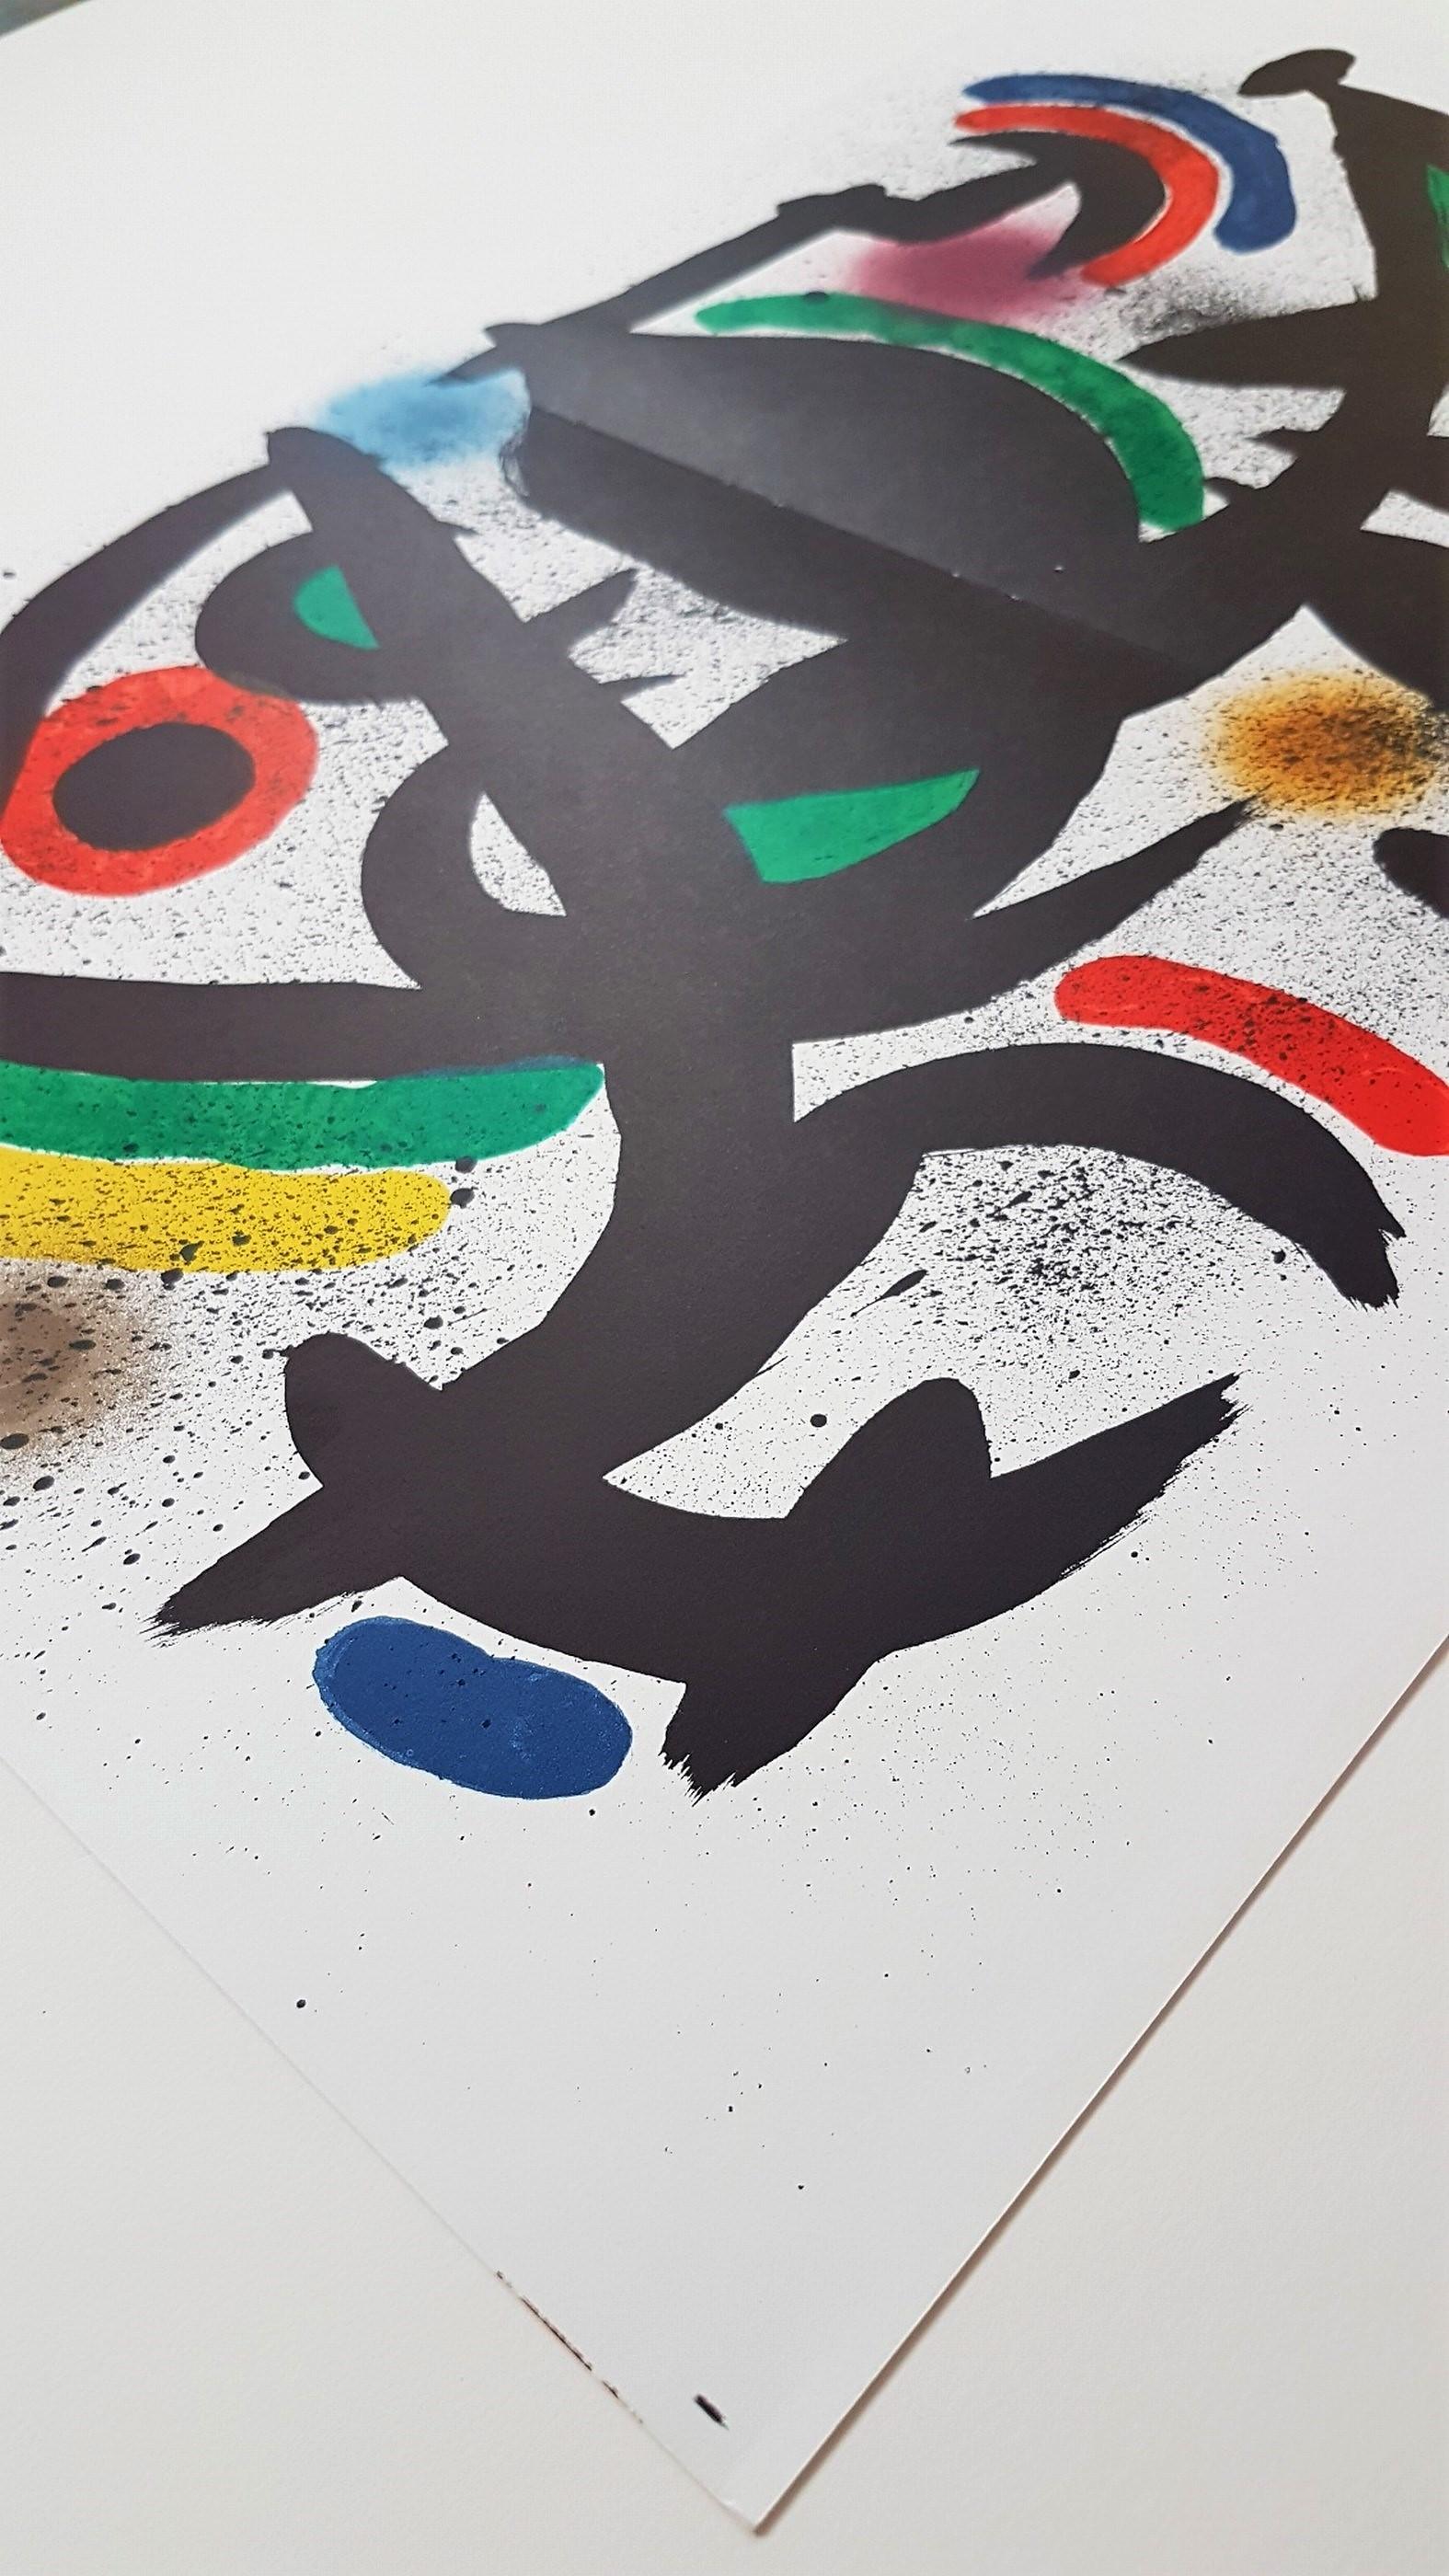 Joan Miró
Litografia Original VIII
Medium: Color Lithograph
Year: 1972
Publisher: Ediciones Poligrafa, S.A., Barcelona
Catalogue raisonné: Mourlot 866
Size: 13.1 × 19.9 inches 
Unsigned and part of an unknown-sized edition
Centerfold as issued,